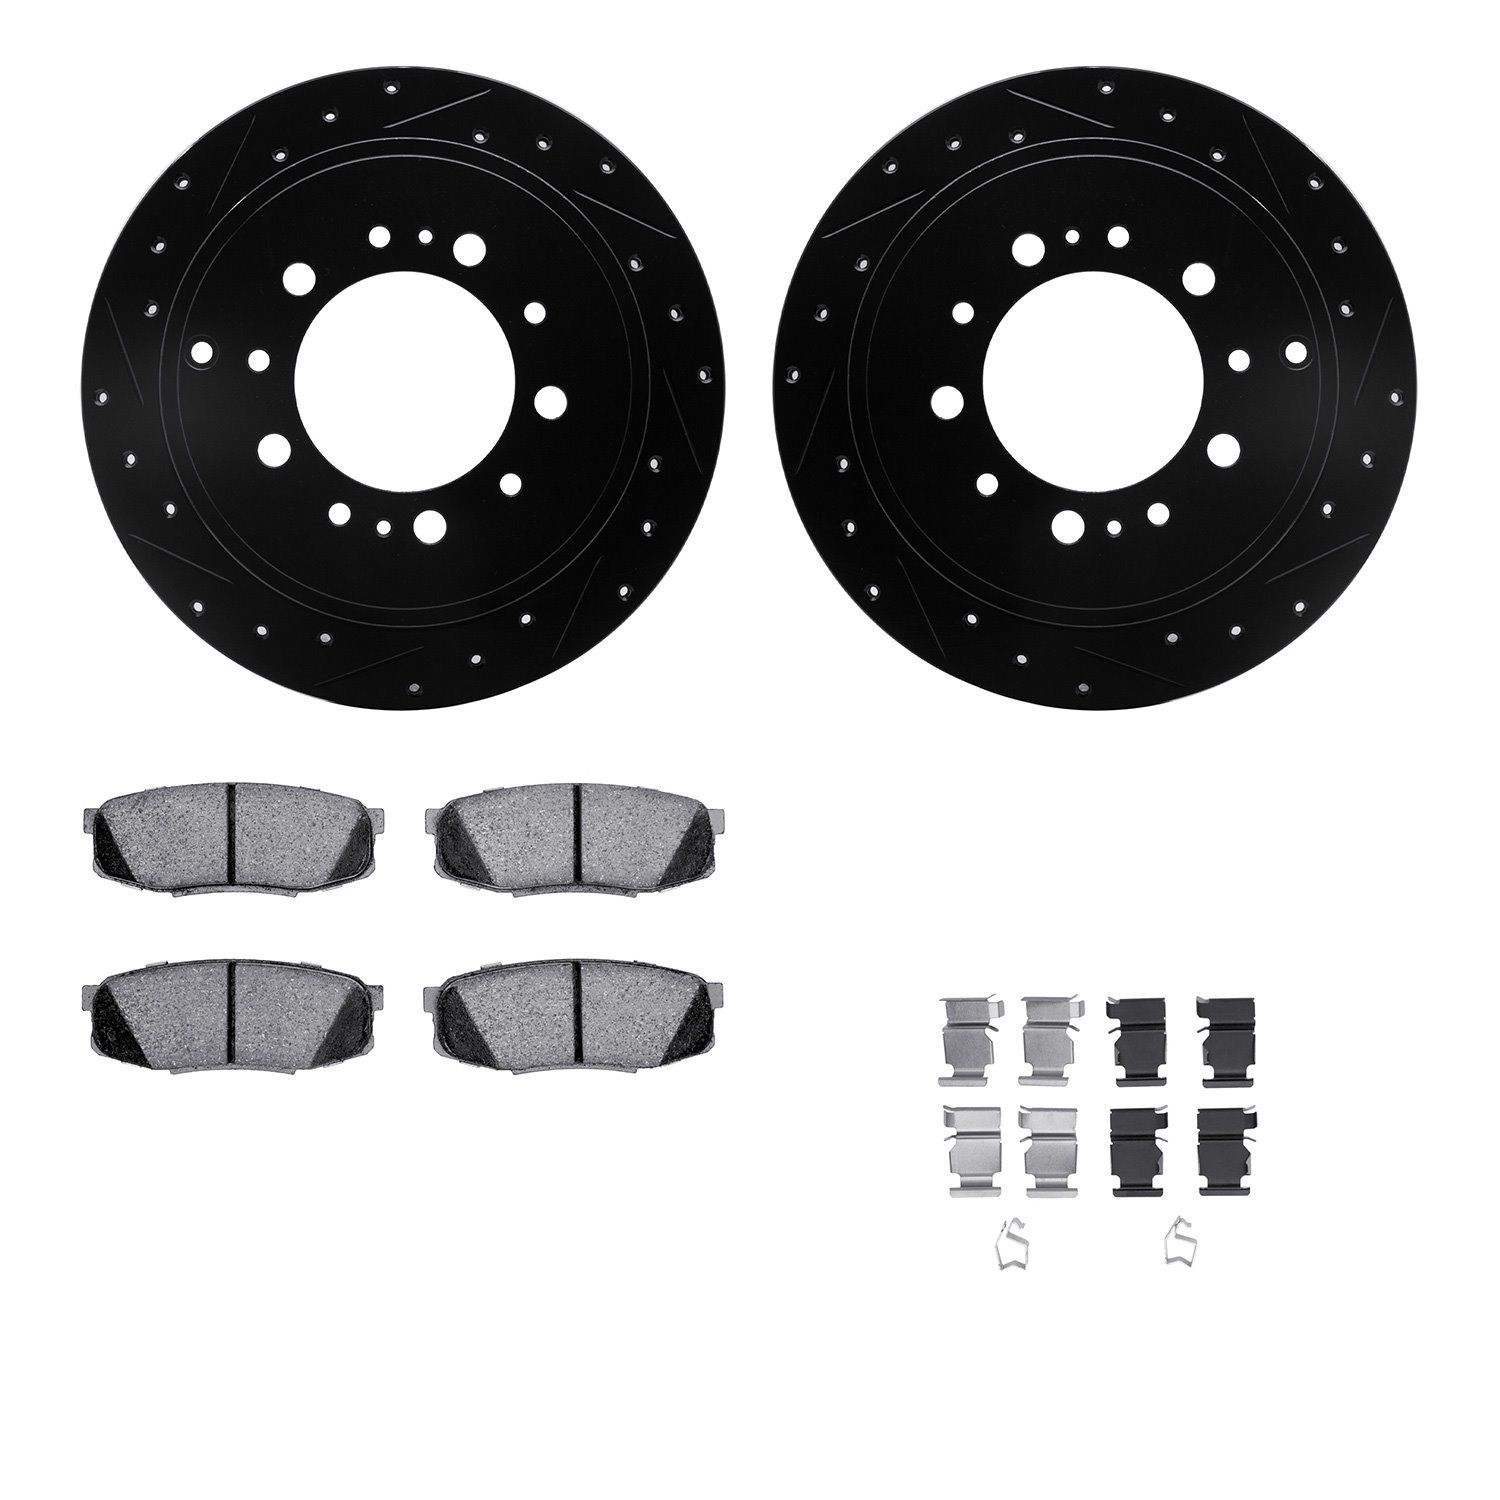 8412-76020 Drilled/Slotted Brake Rotors with Ultimate-Duty Brake Pads Kit & Hardware [Black], Fits Select Lexus/Toyota/Scion, Po